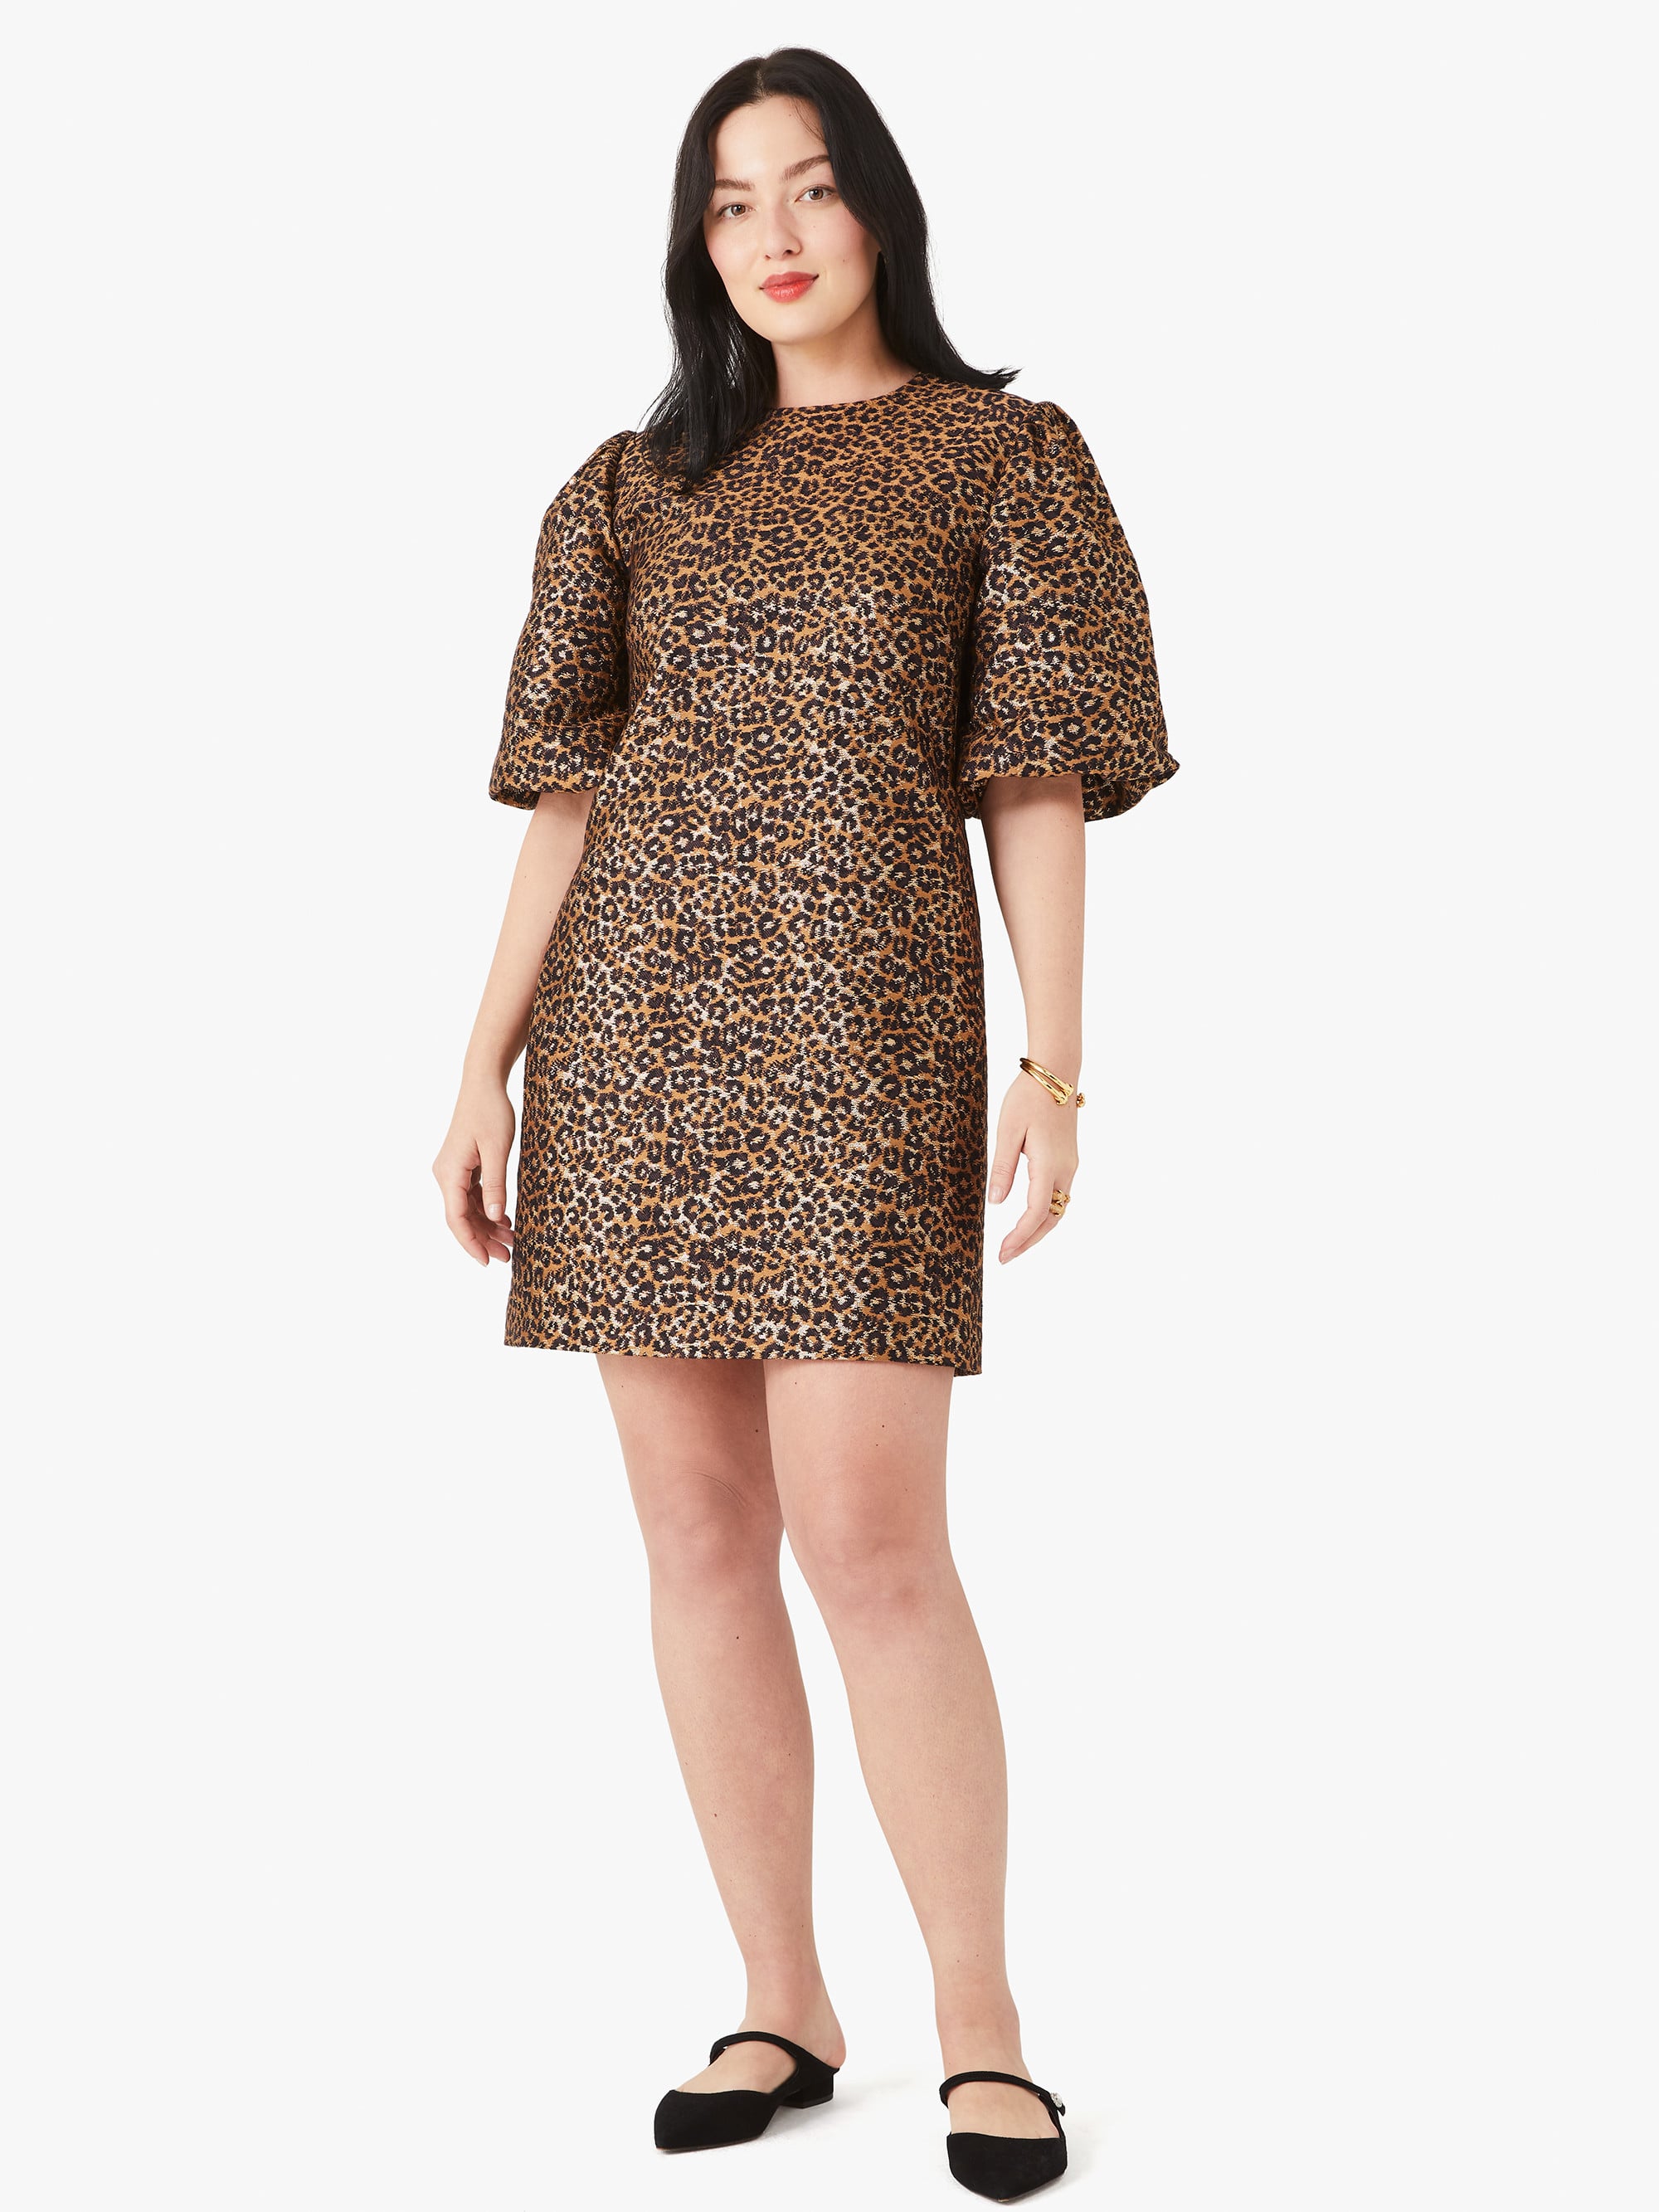 Make a Statement: Leopard Taxi Dress | Plaid and Leopard Print Galore! Kate  Spade NY Just Released a Gorgeous New Fall Collection | POPSUGAR Fashion  Photo 6